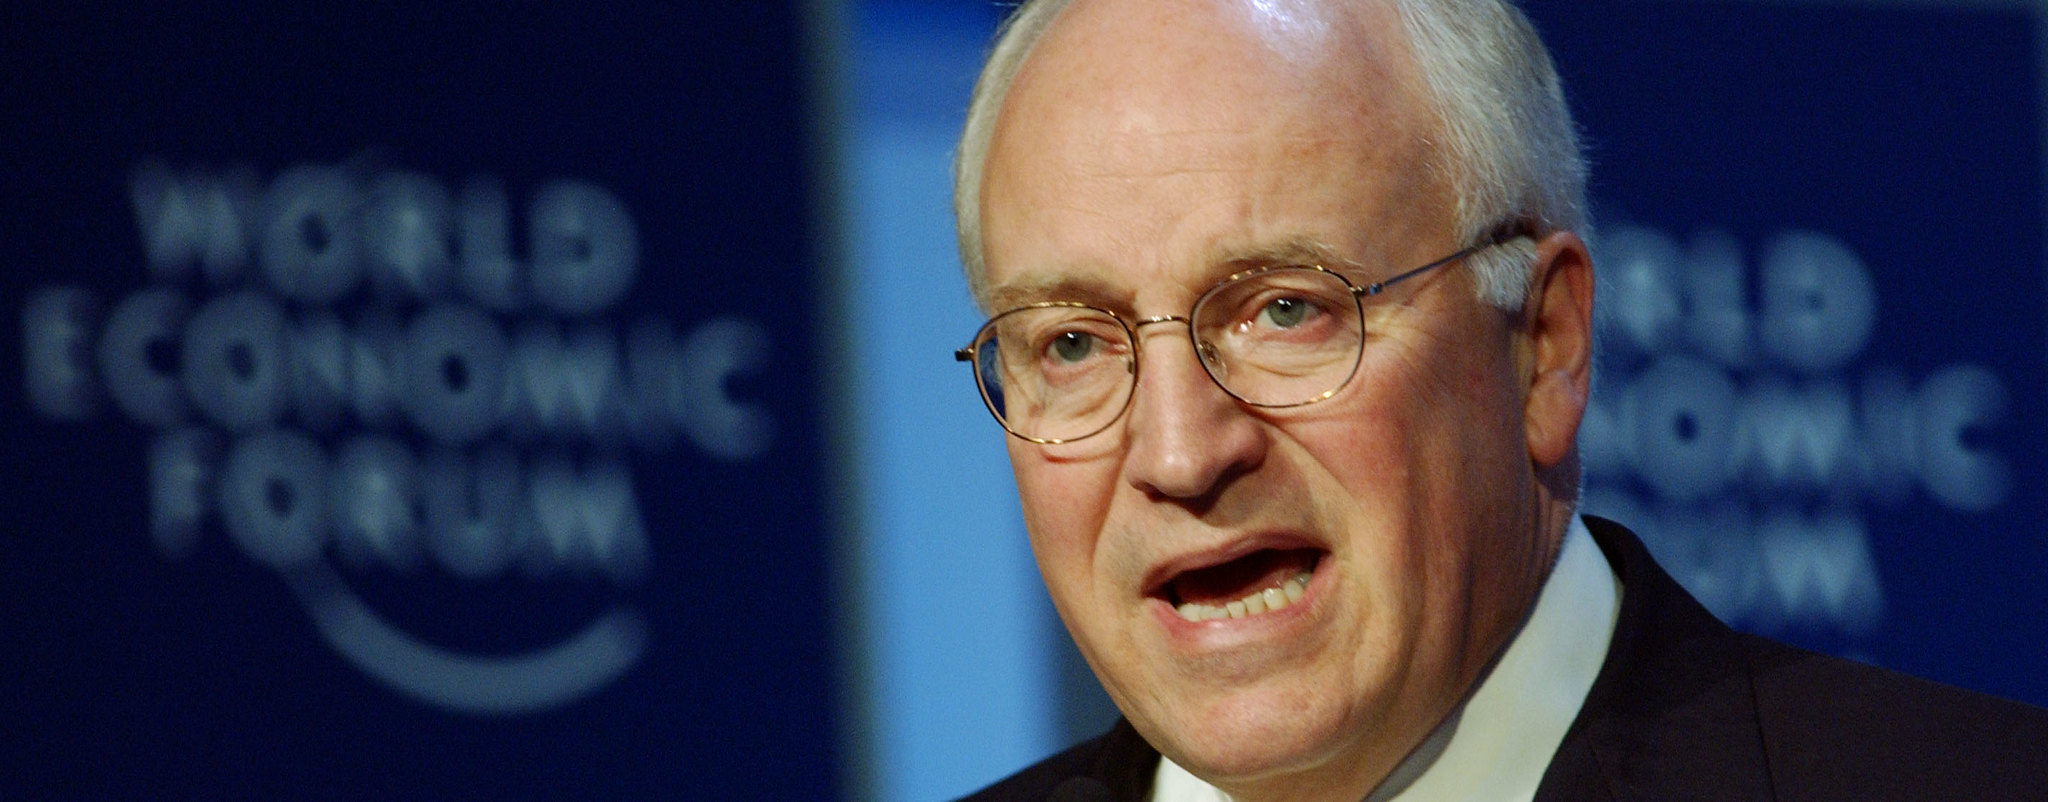 Dick cheney influence on foreign policy